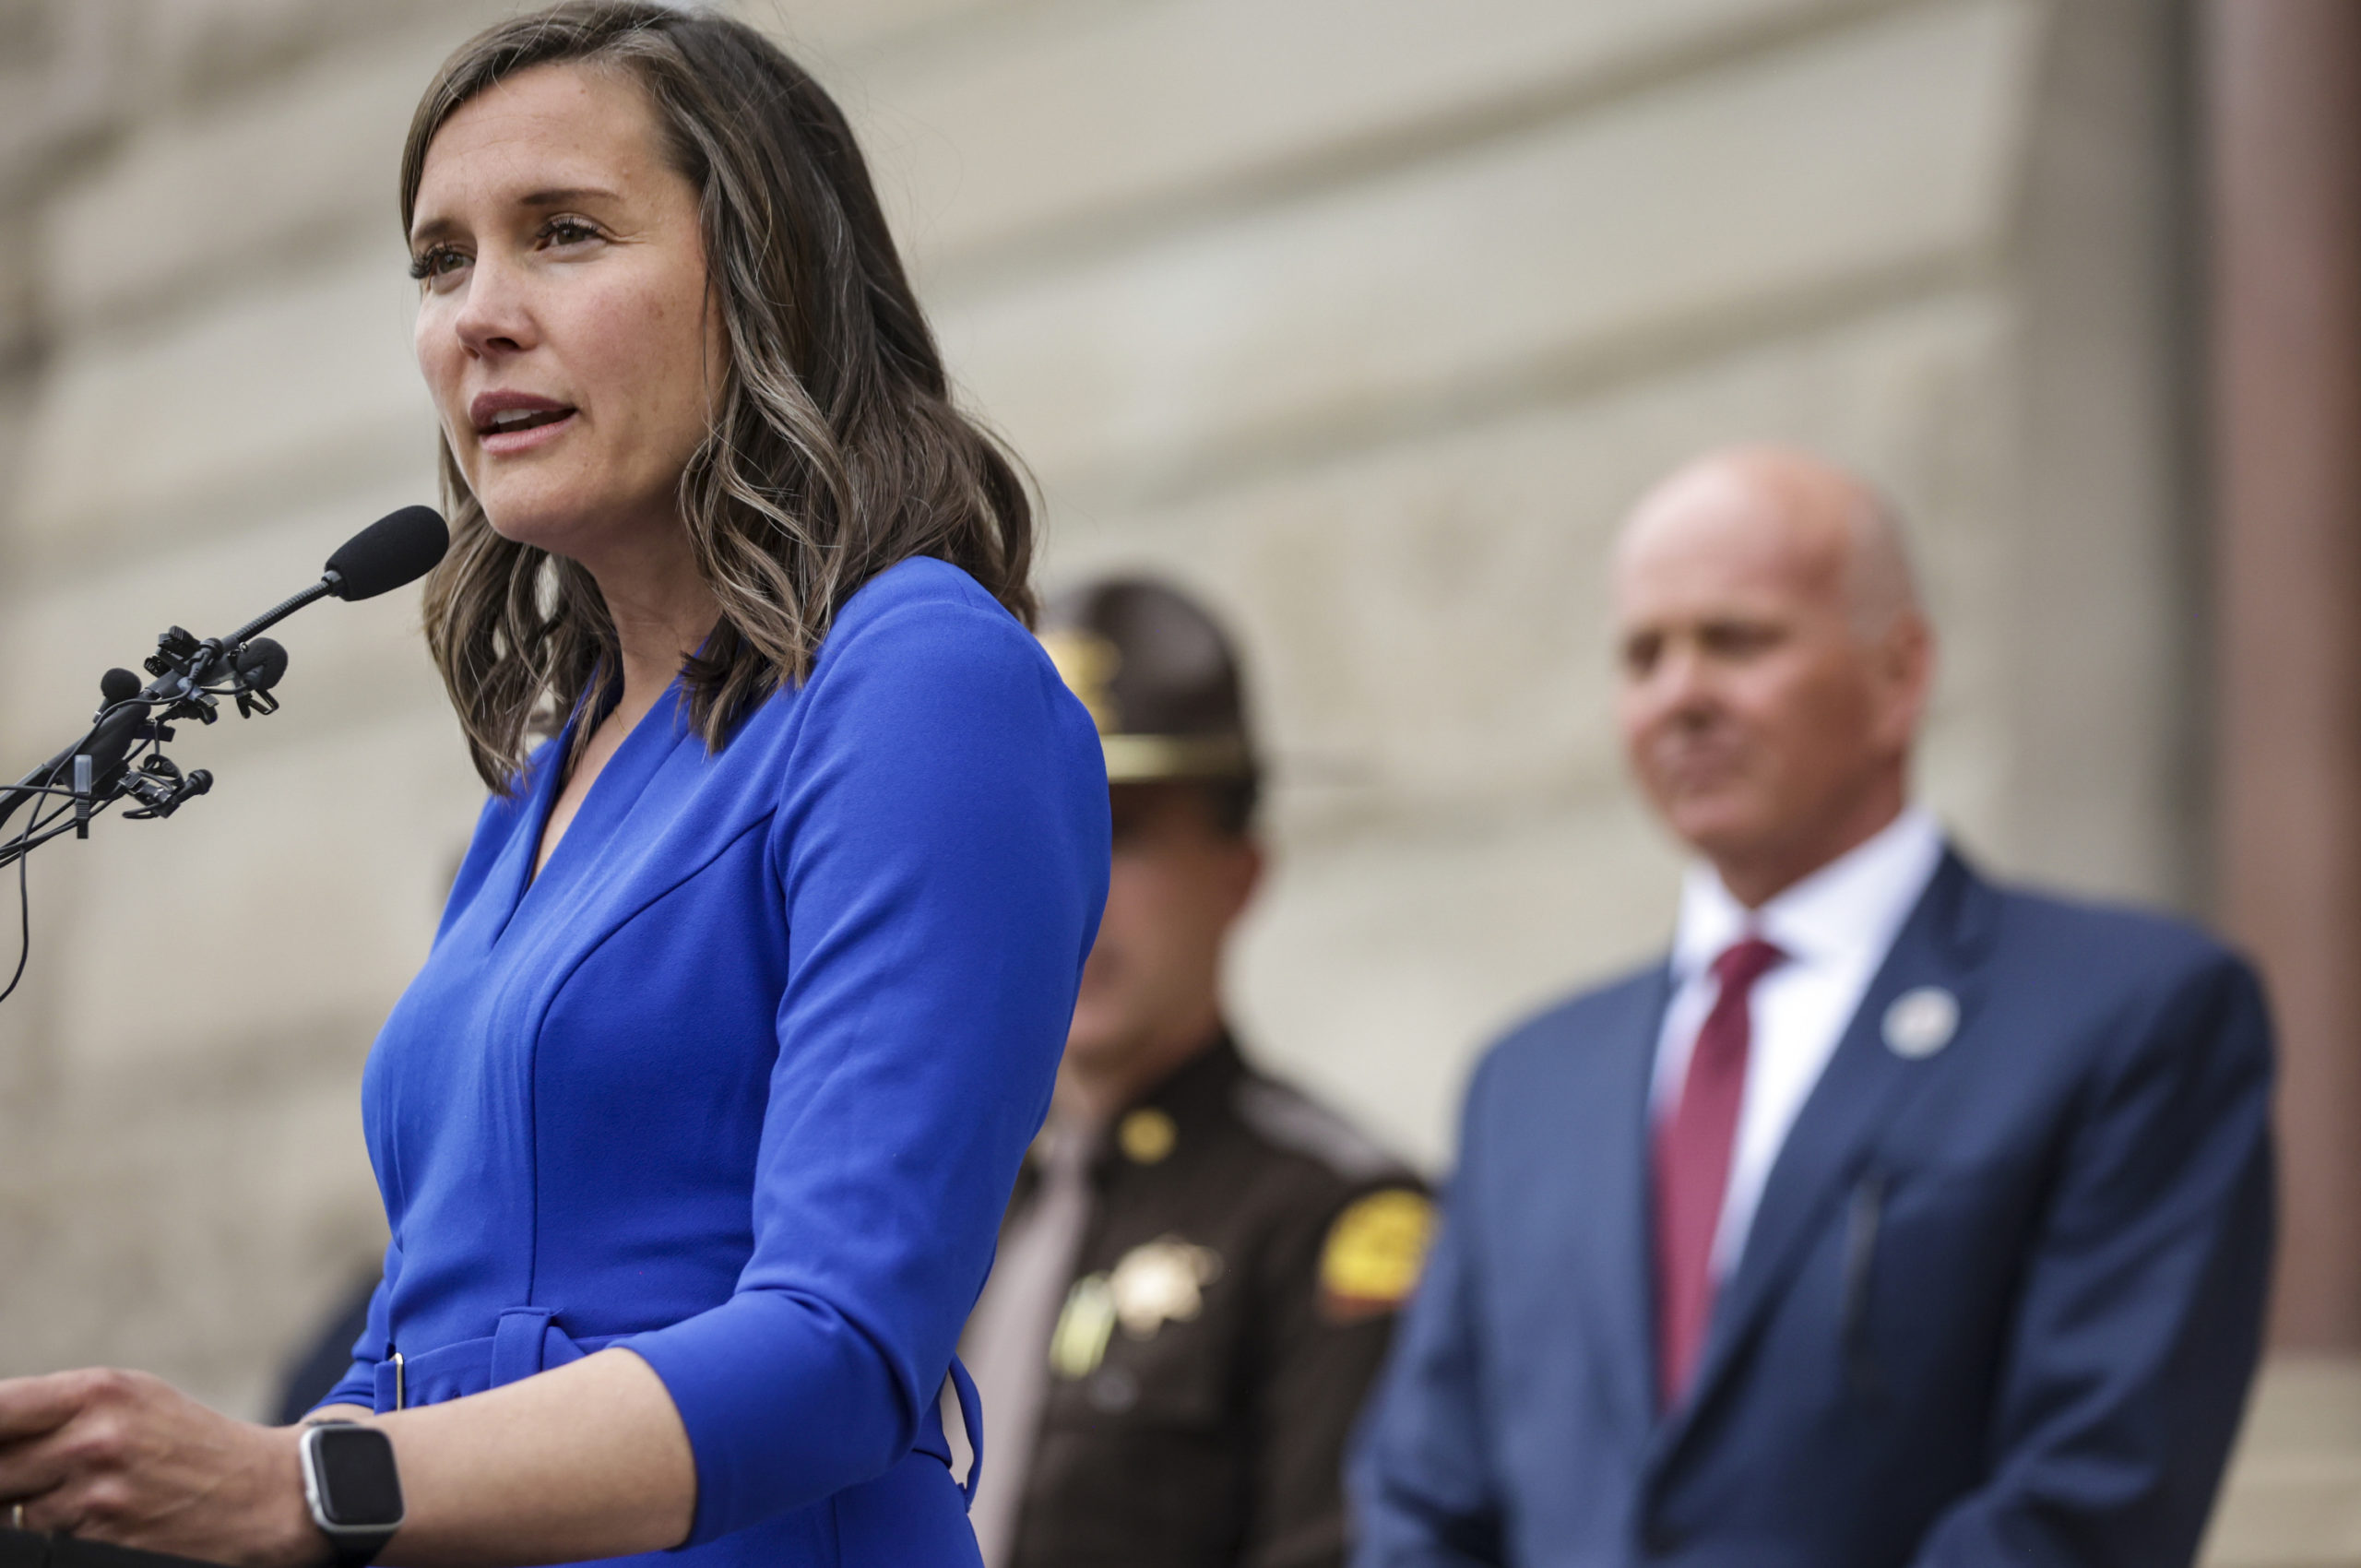 Salt Lake City Mayor Erin Mendenhall urges Utahns to drive with caution after a recent increase in ...